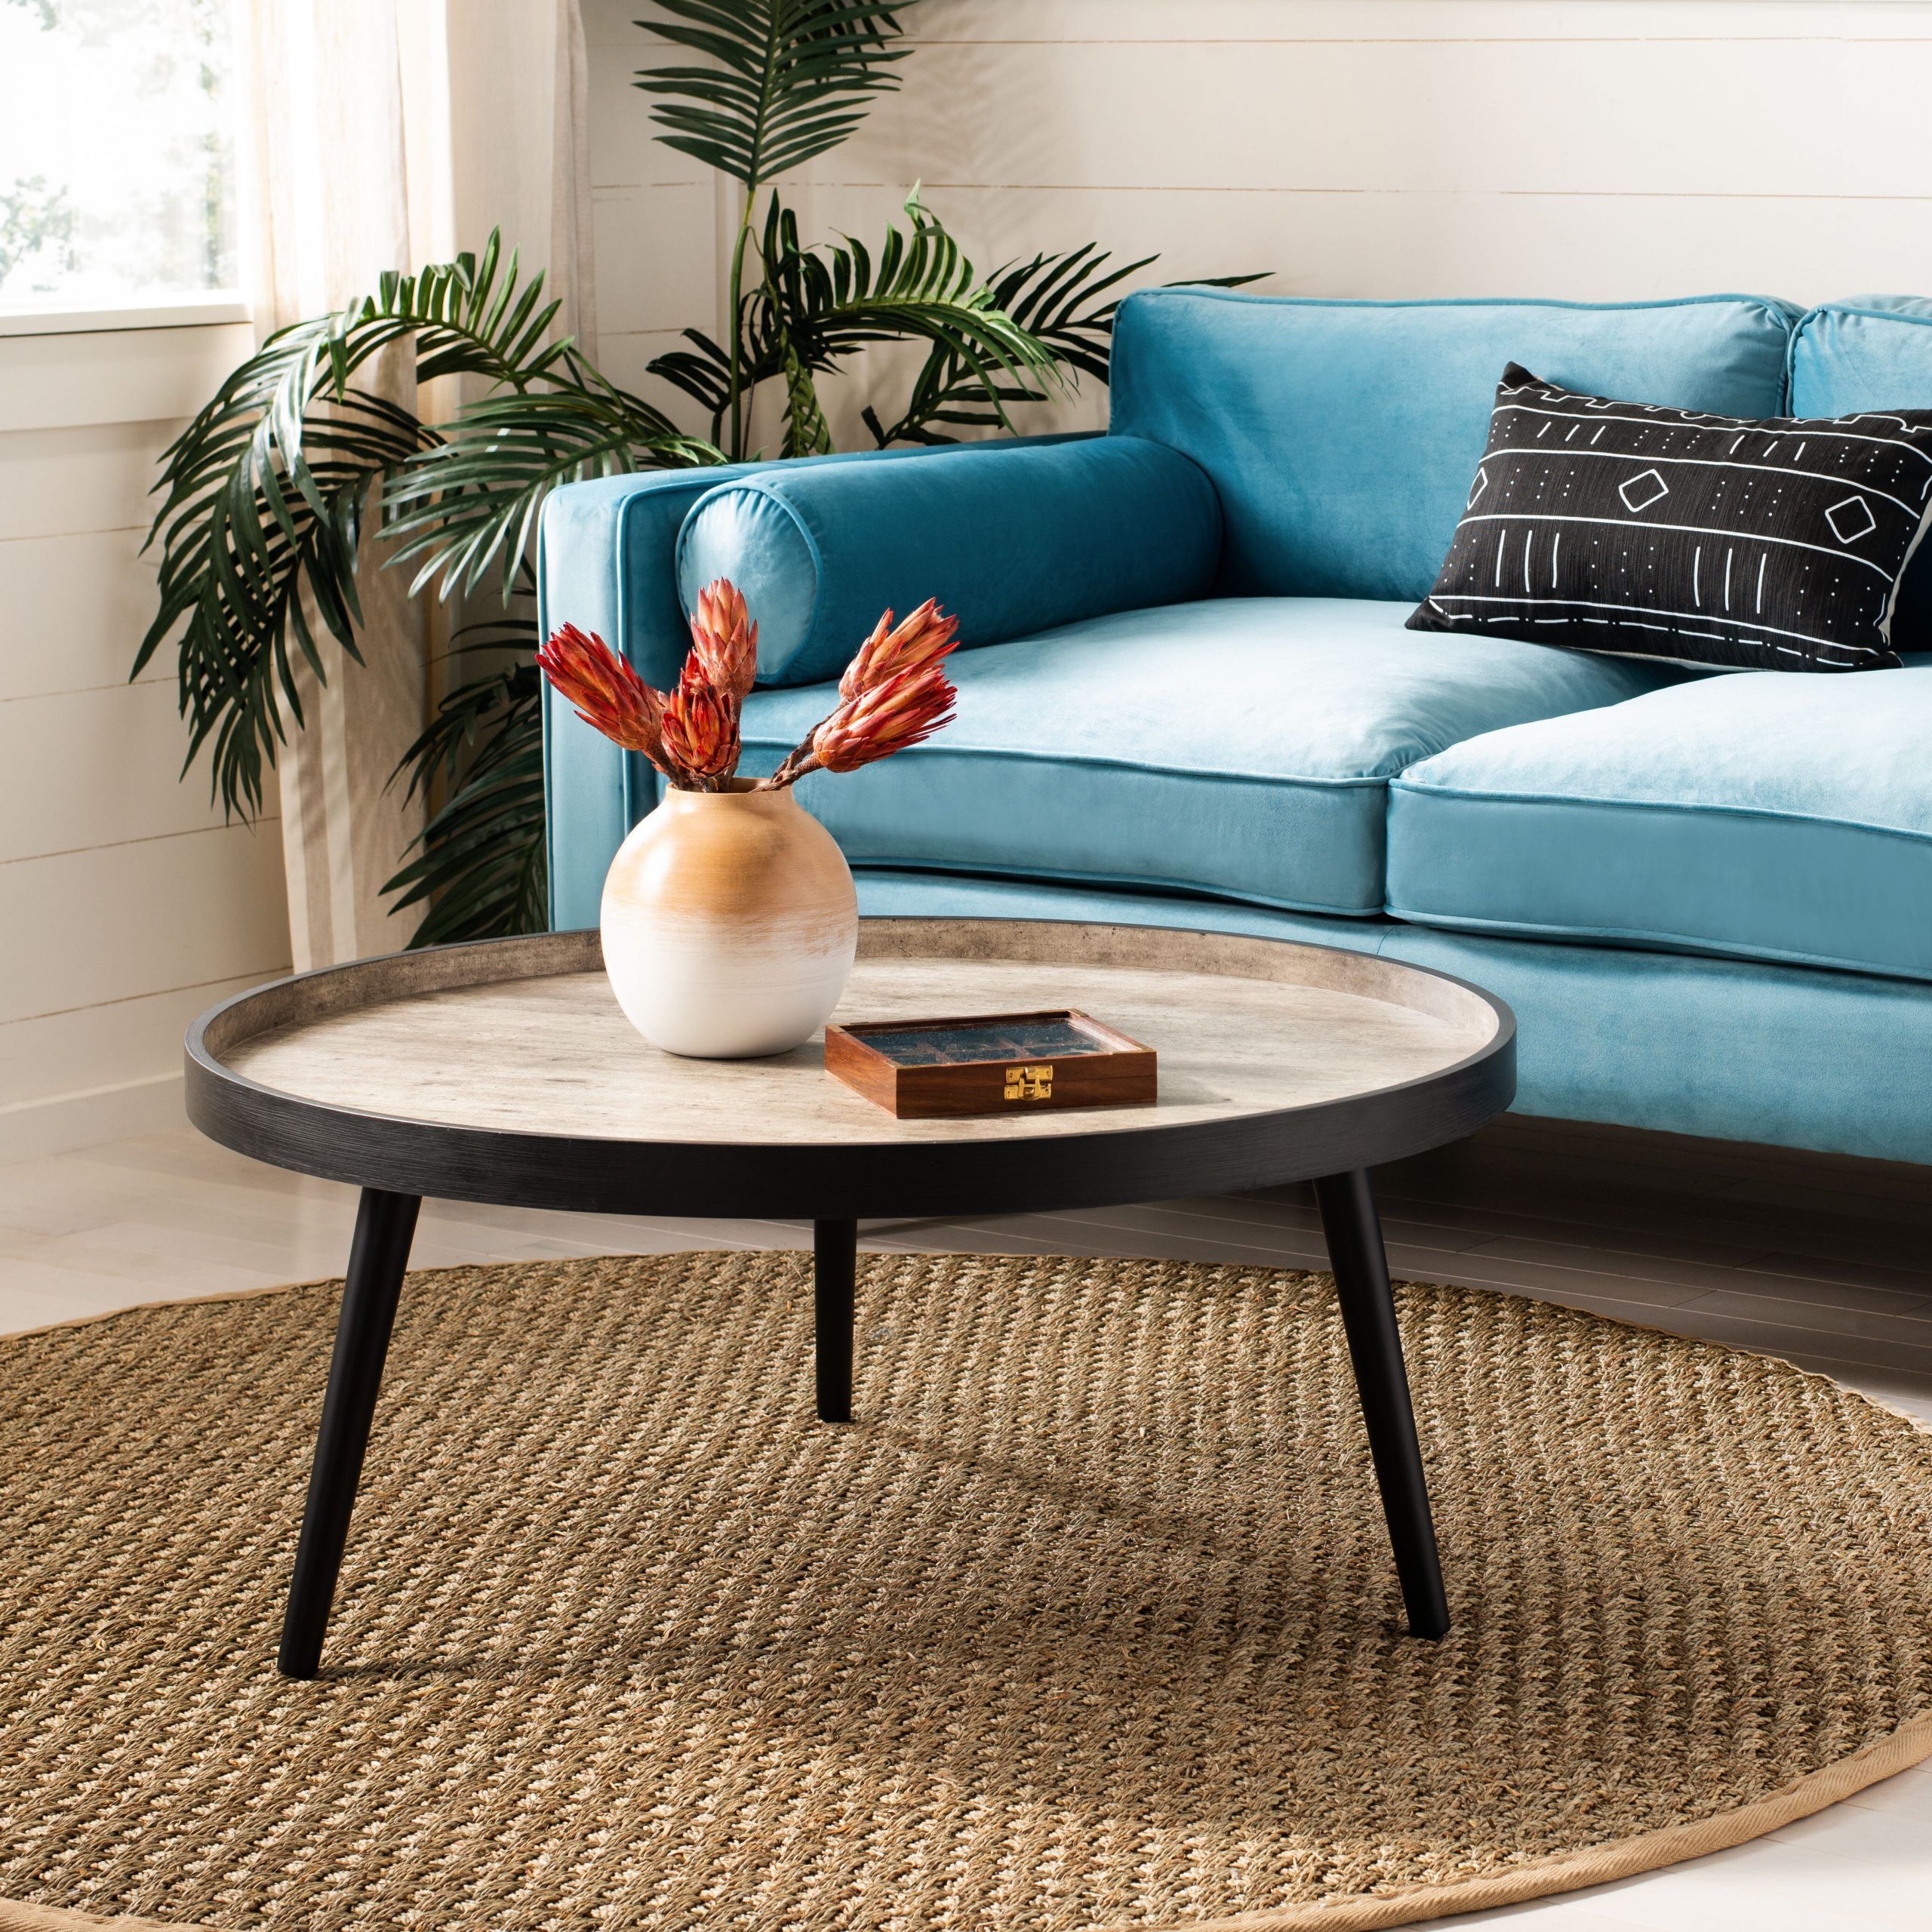 Wrought Studio 3 Legs Coffee Table & Reviews | Wayfair Throughout 3 Leg Coffee Tables (View 18 of 20)